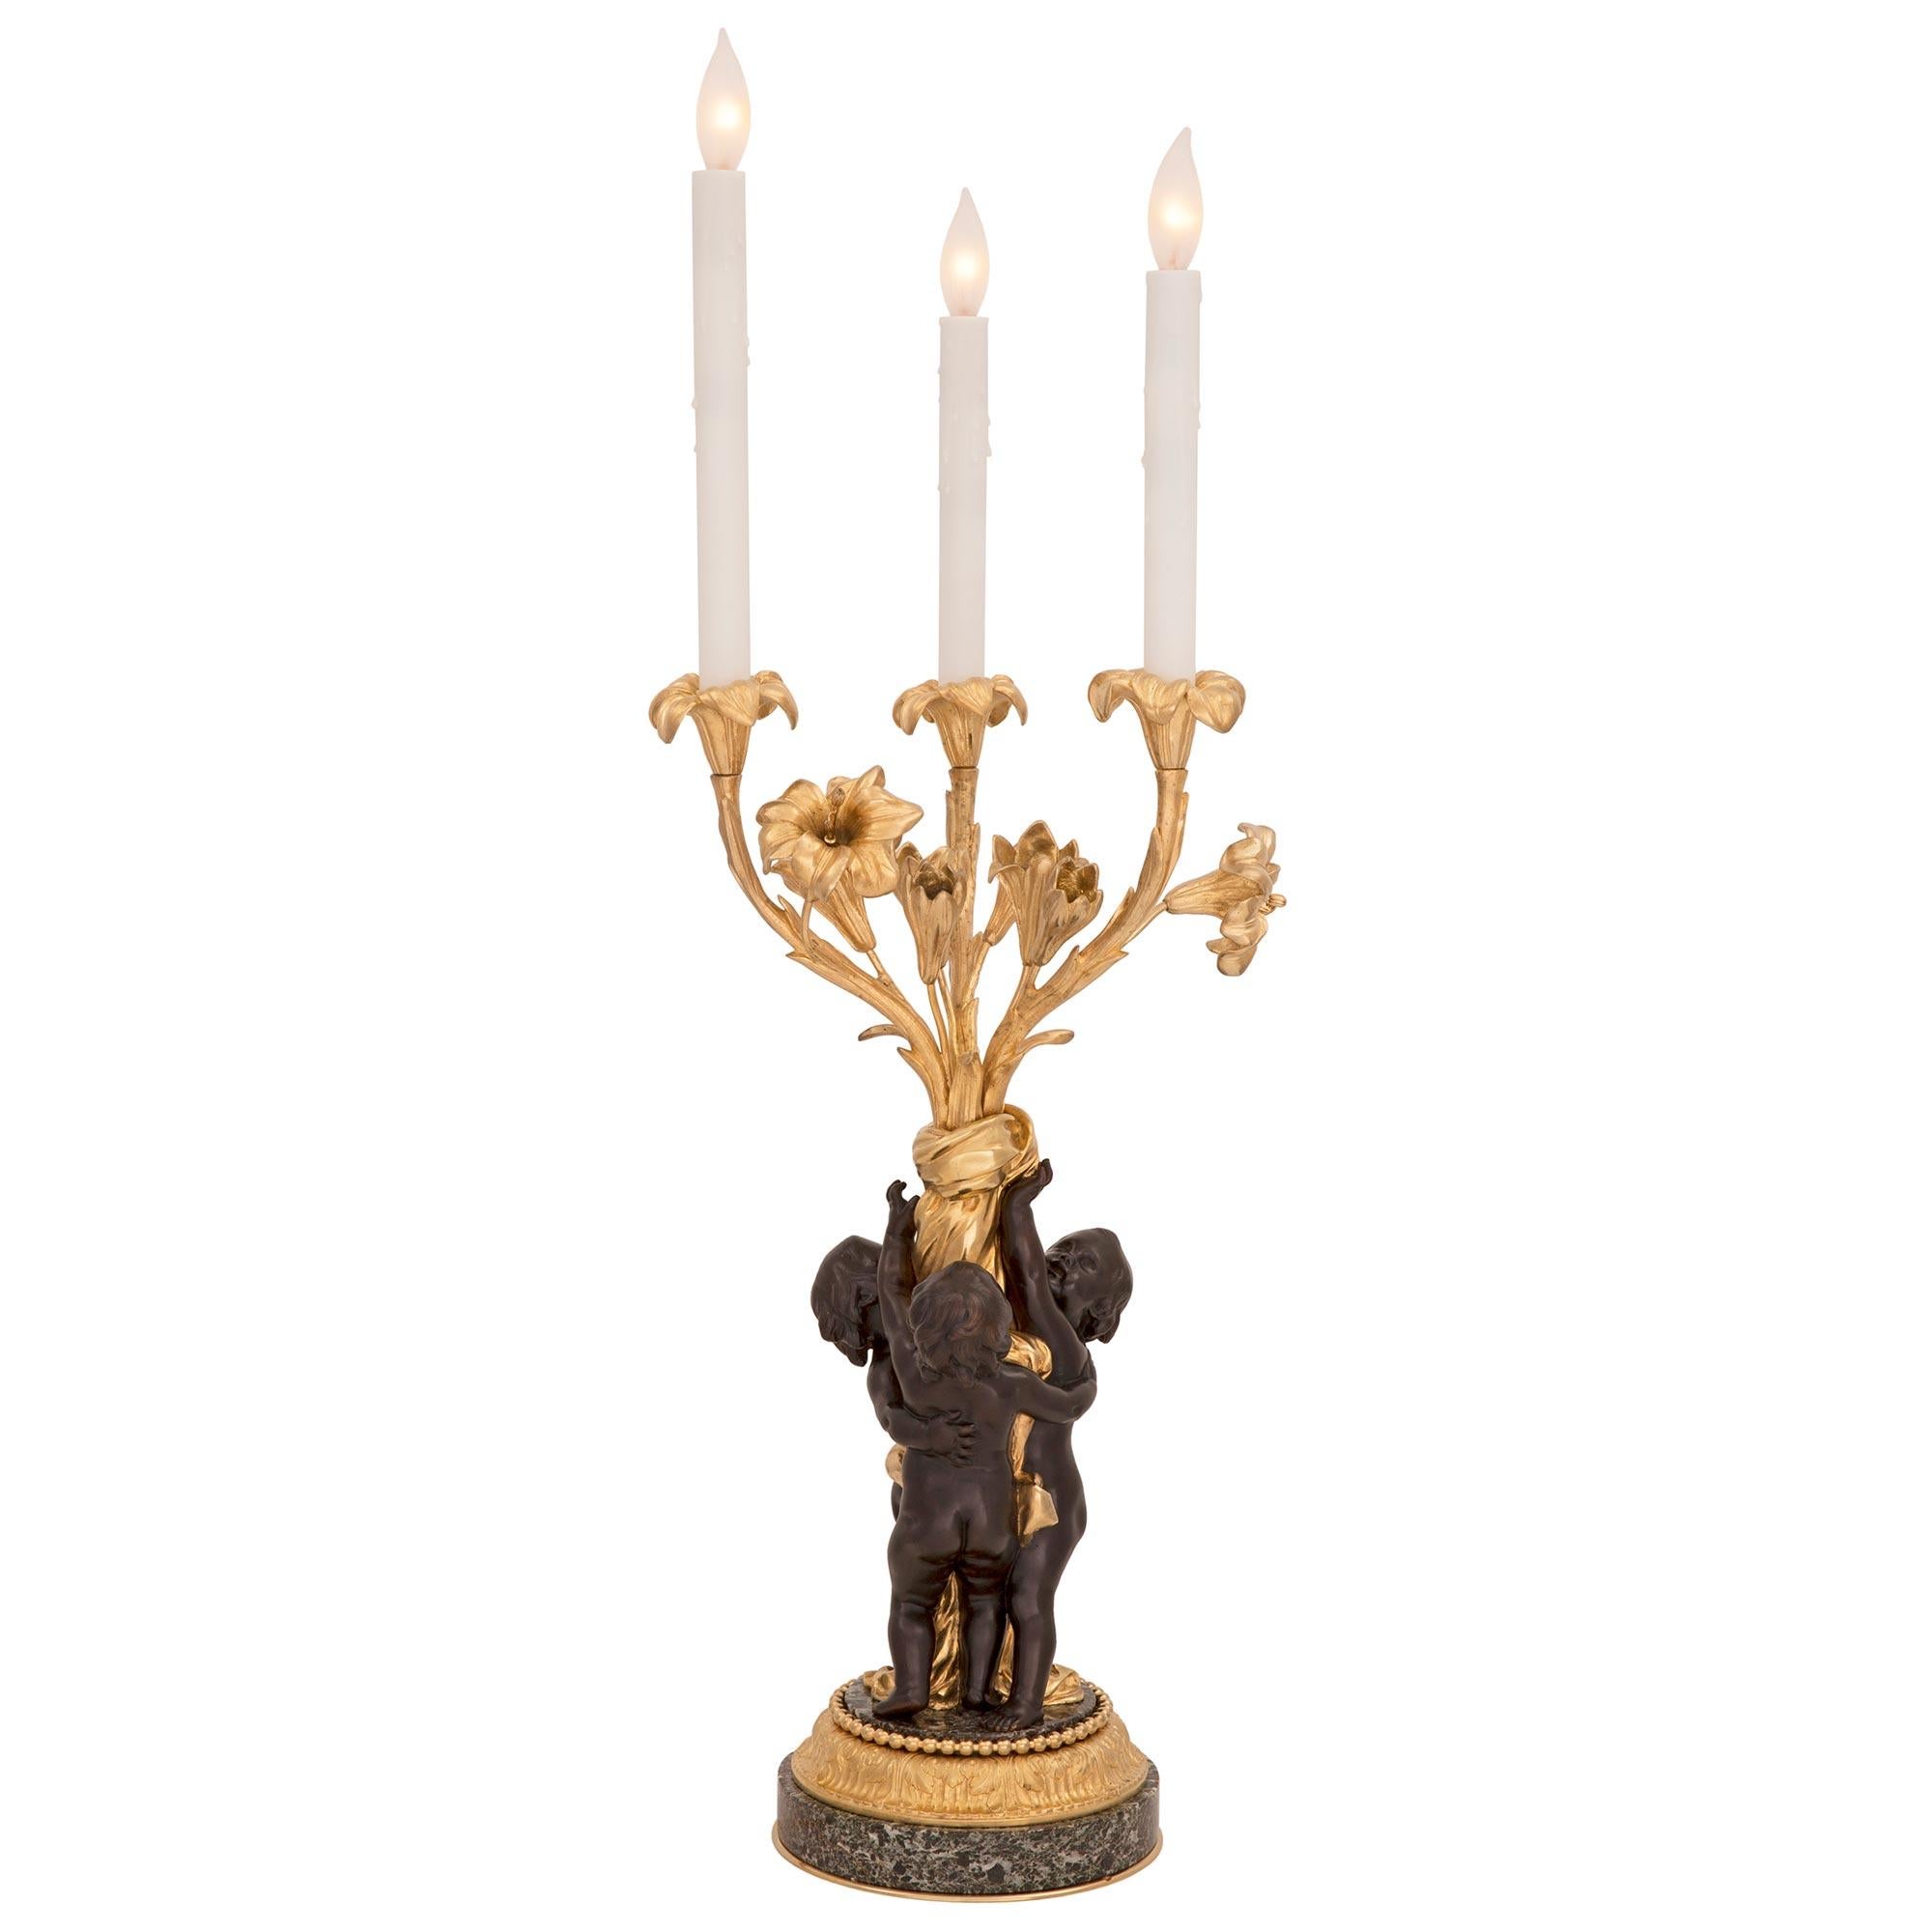 An exquisite pair of French 19th century Louis XVI st. patinated bronze, ormolu and Vert de Patricia marble candelabra lamps. Each lamp is raised by an elegant circular base with fine bottom ormolu bands and top foliate and beaded wrap around bands.